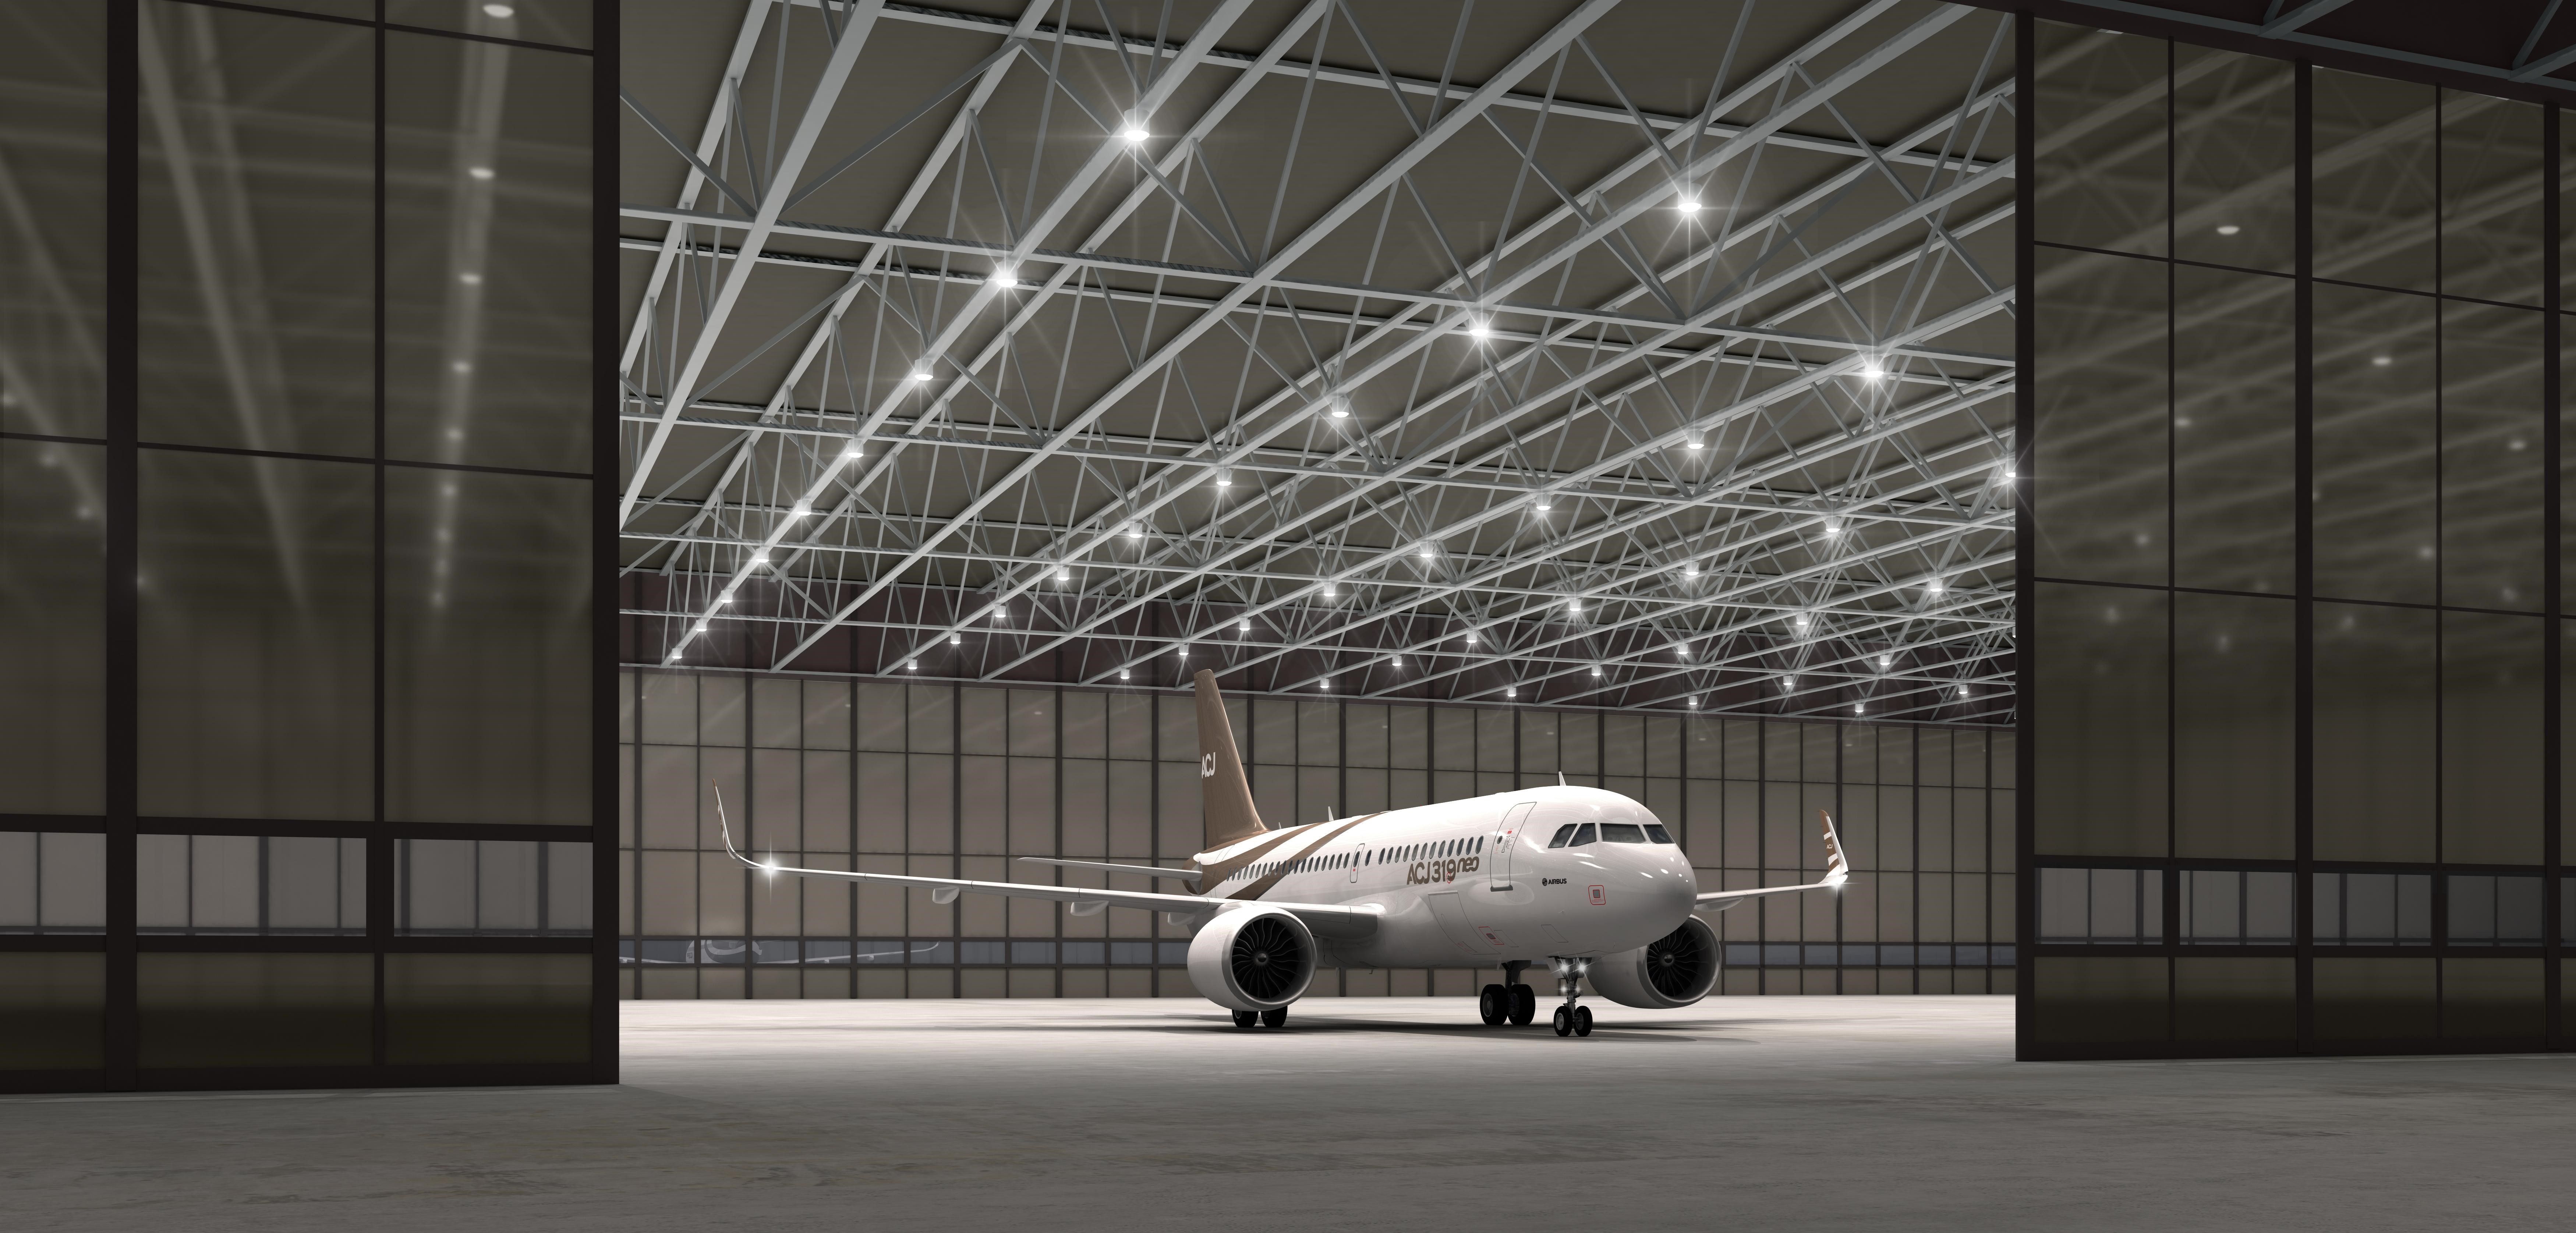 The ACJ319neo in a hangar at Toulouse